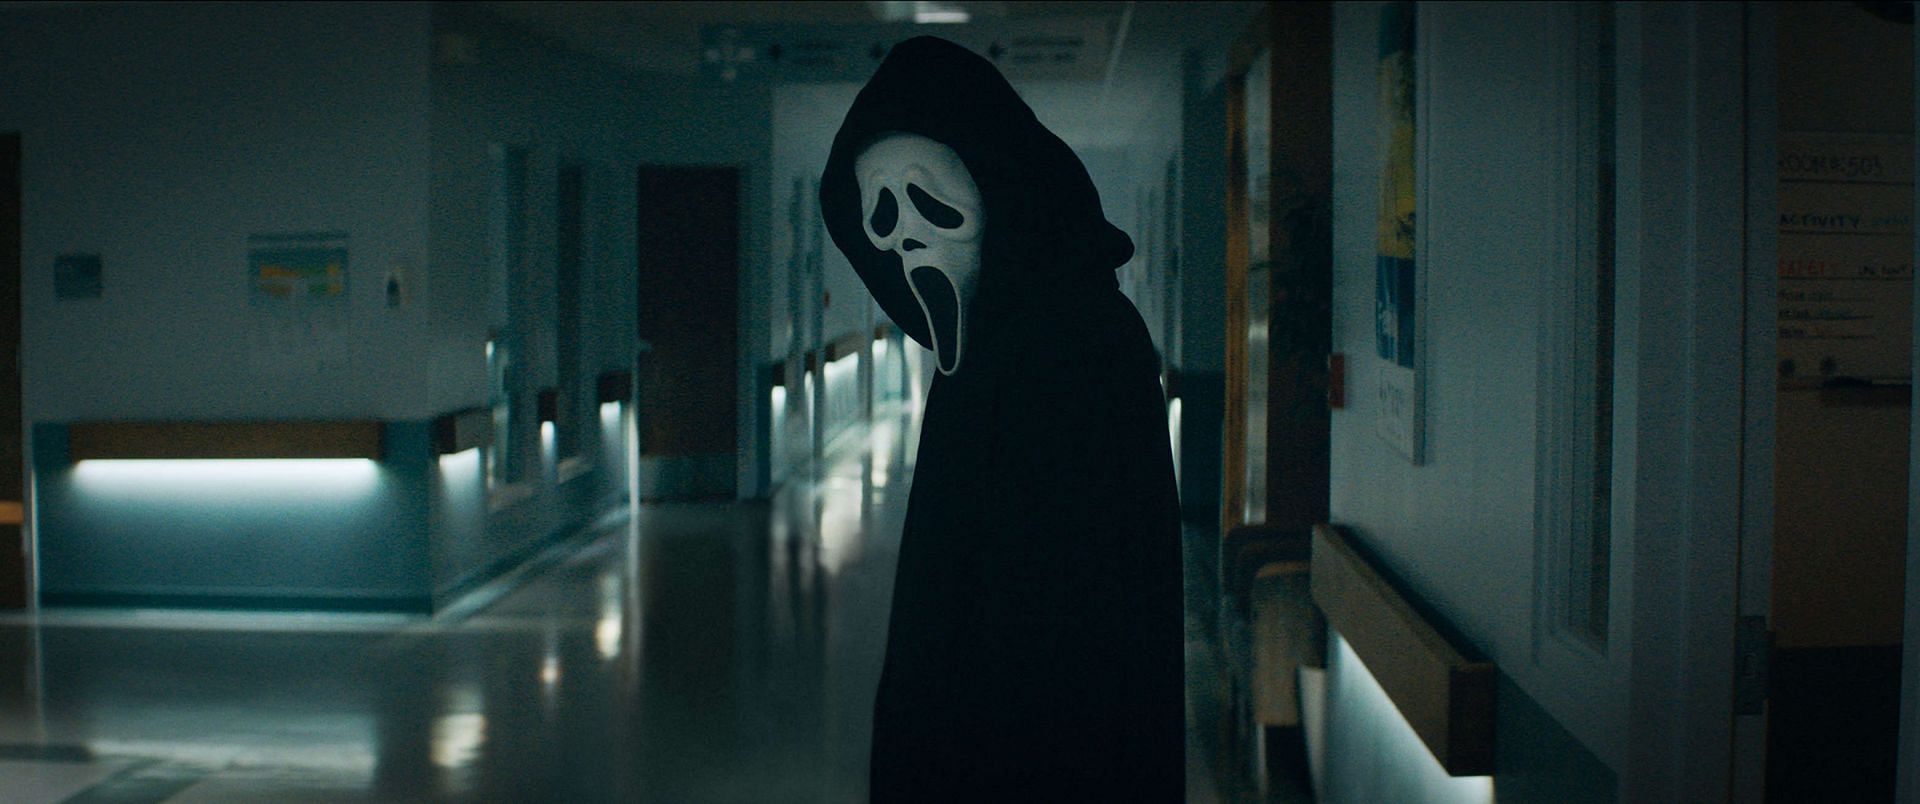 The group sets a trap for Ghostface in Scream 6 (Image via Paramount Pictures)